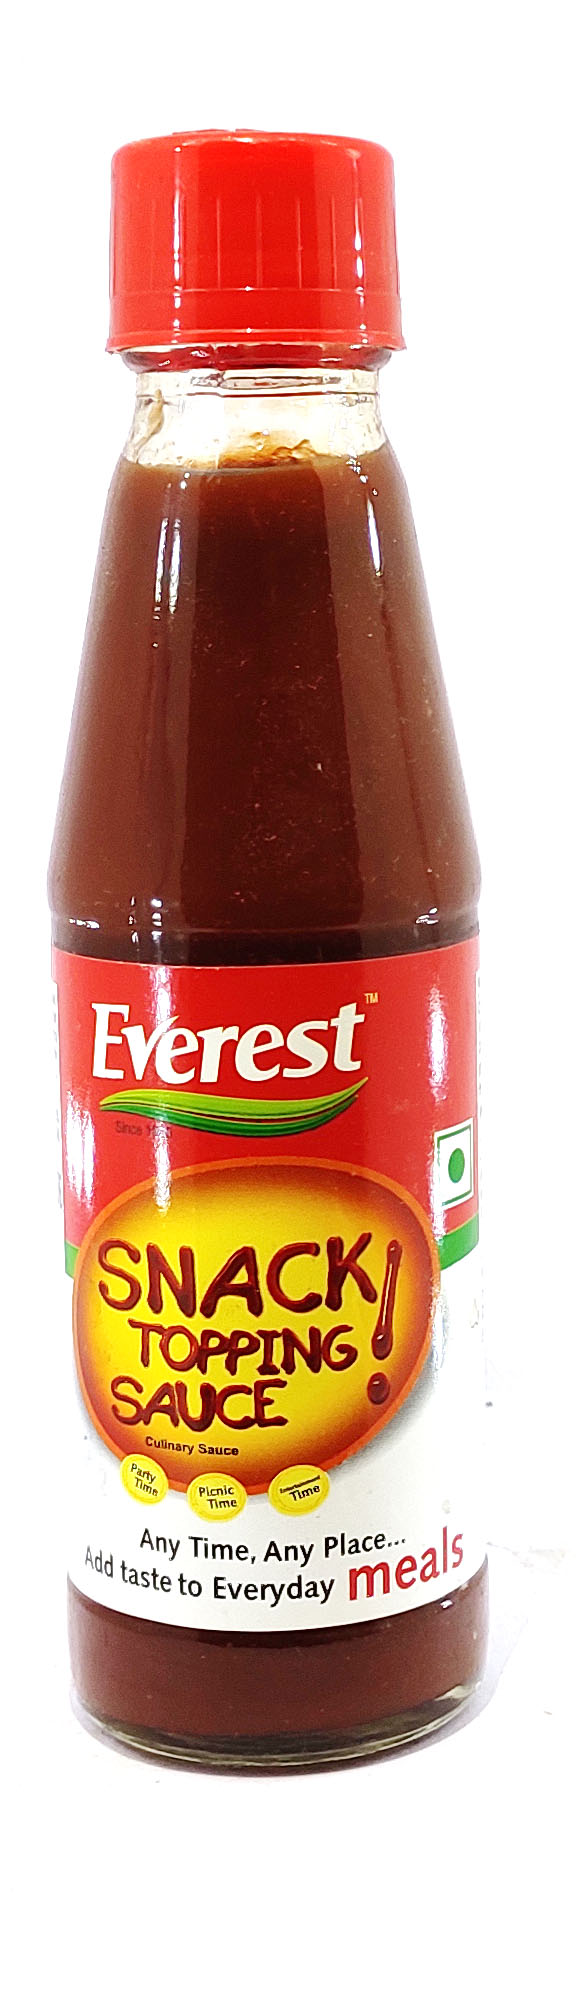 Everest Snack Topping Sauce 200g